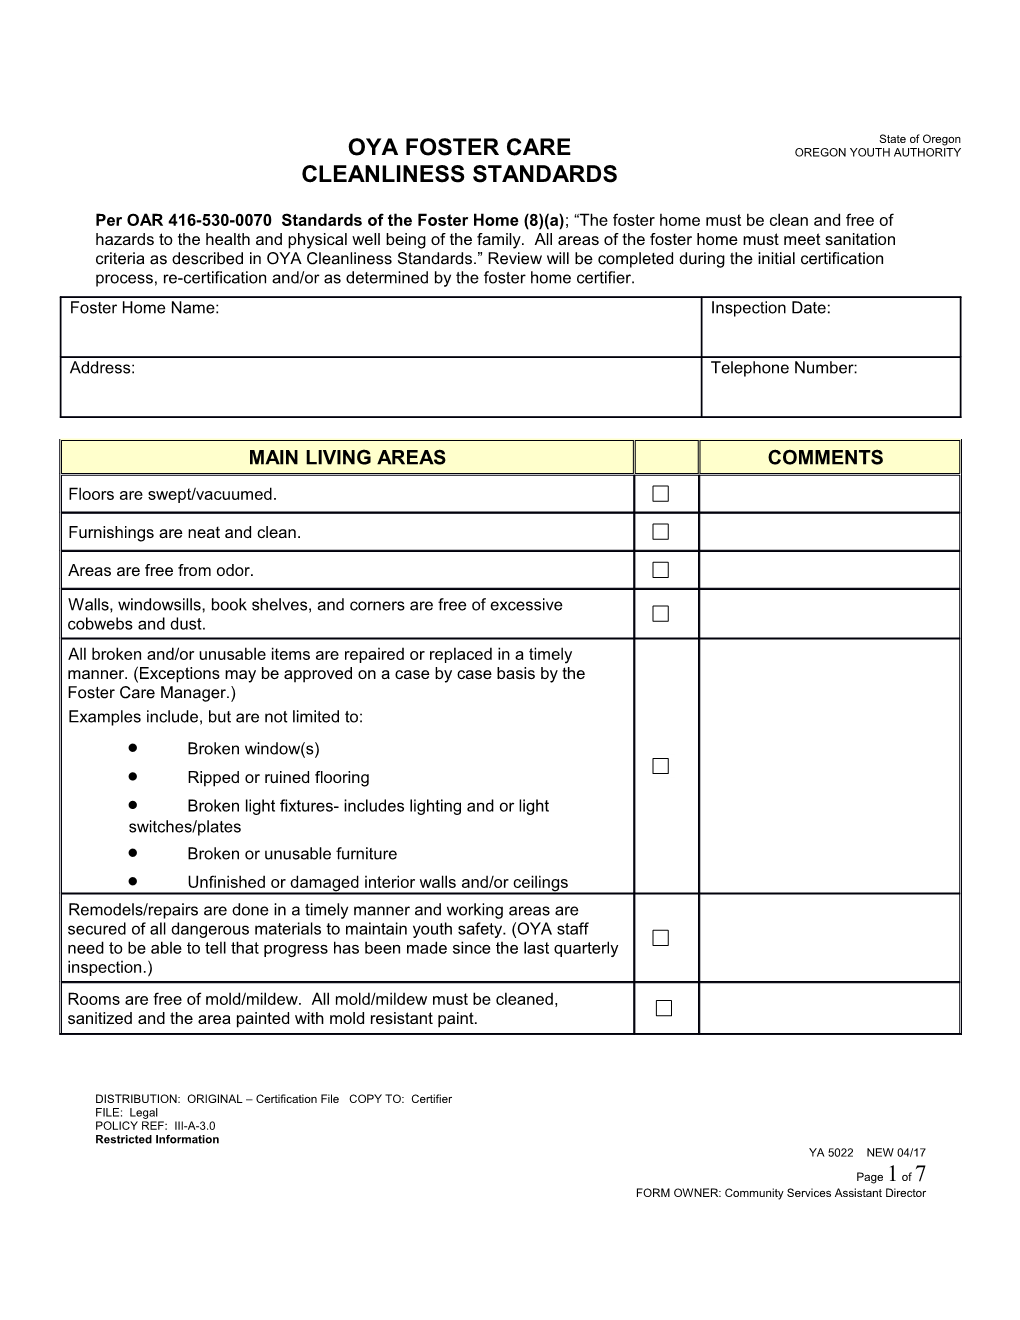 YA 5022 - Foster Care Cleanliness Standards